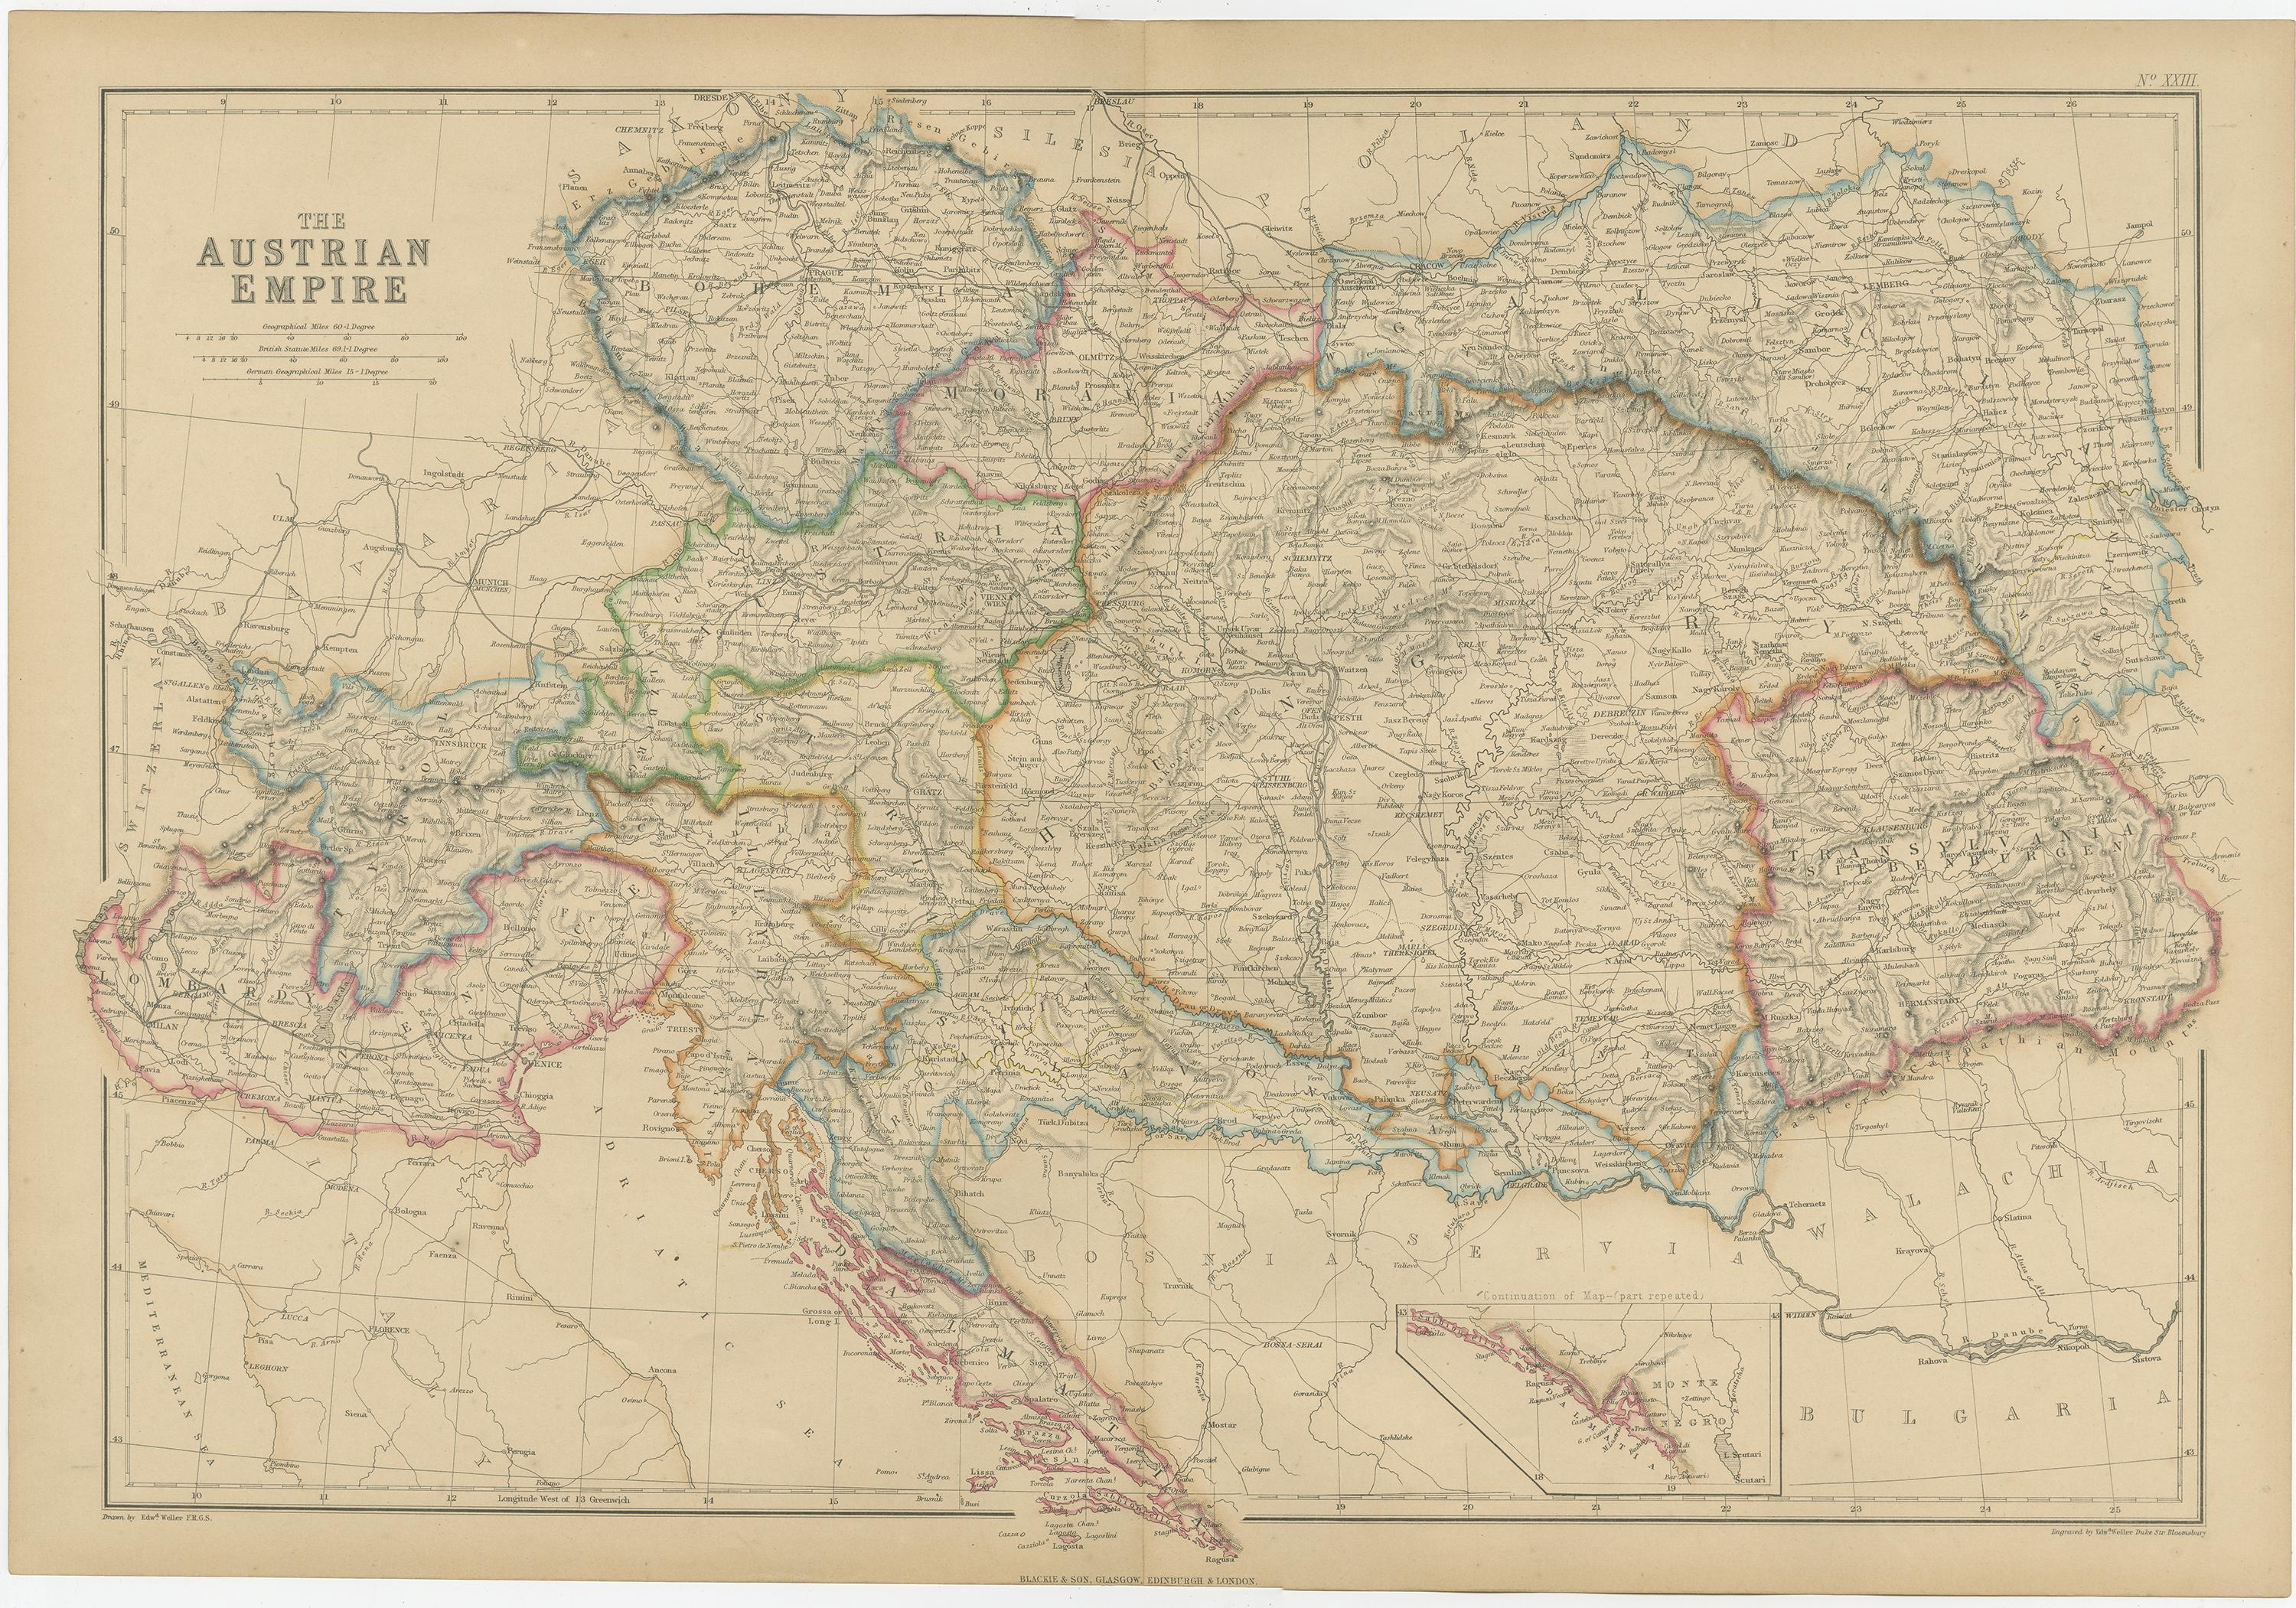 Antique map titled 'The Austrian Empire'. Original antique map of the Austrian Empire with inset map of Montenegro. This map originates from ‘The Imperial Atlas of Modern Geography’. Published by W. G. Blackie, 1859.